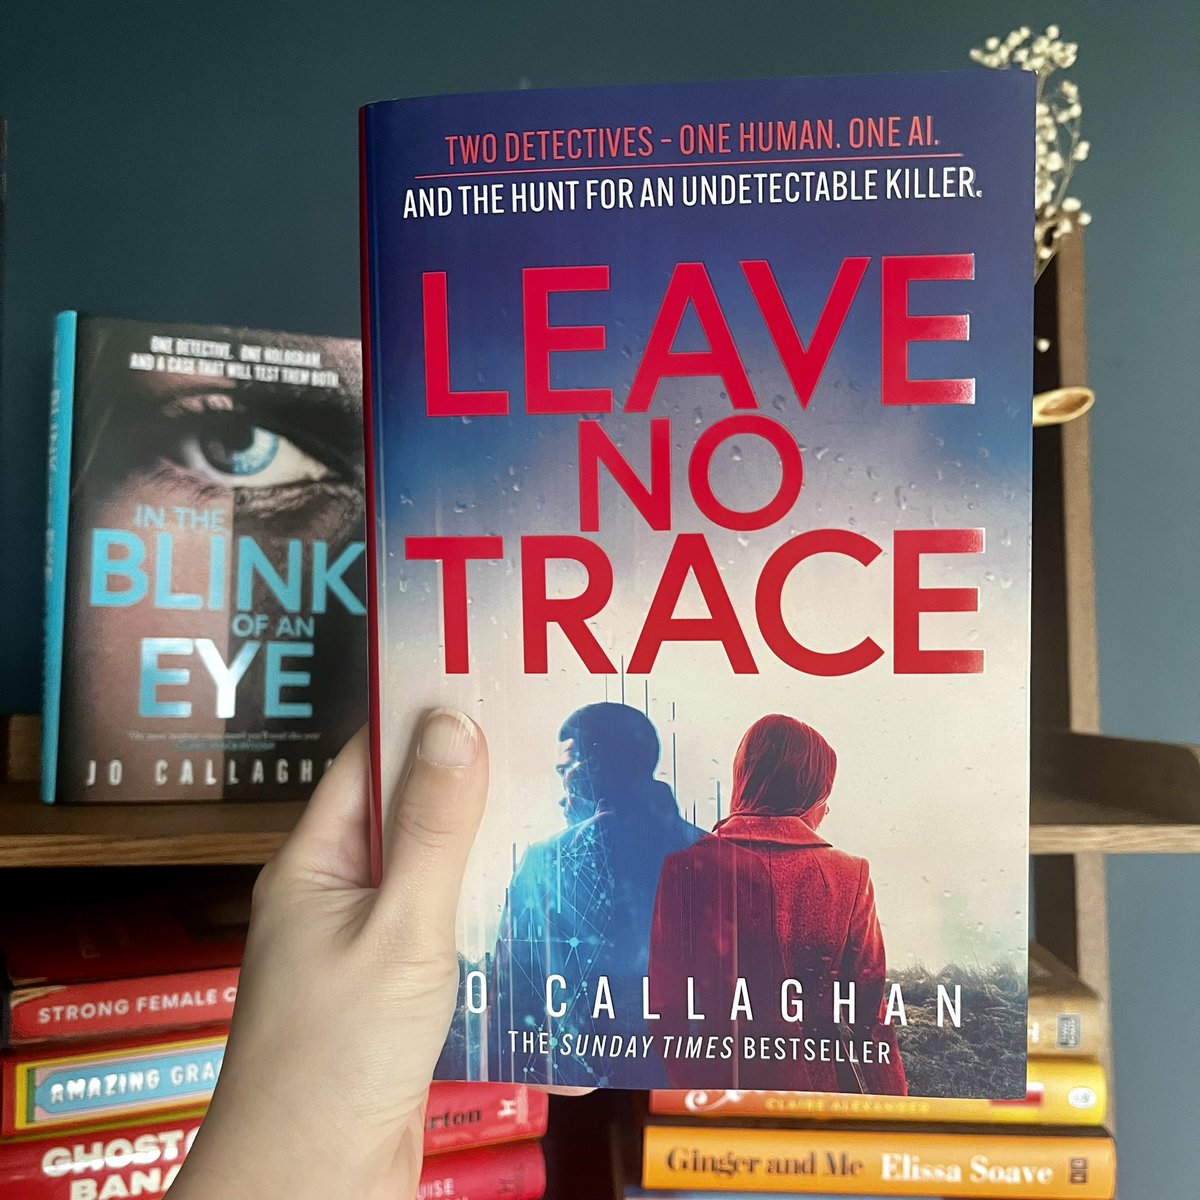 🎉GIVEAWAY🎉 To celebrate the publication of #LeaveNoTrace by @JoCallaghanKat I’m giving away a copy to one of you! Make sure to follow me, RT this post, and comment #LeaveNoTrace below📚 Giveaway closes 6pm 1st April, UK Only.